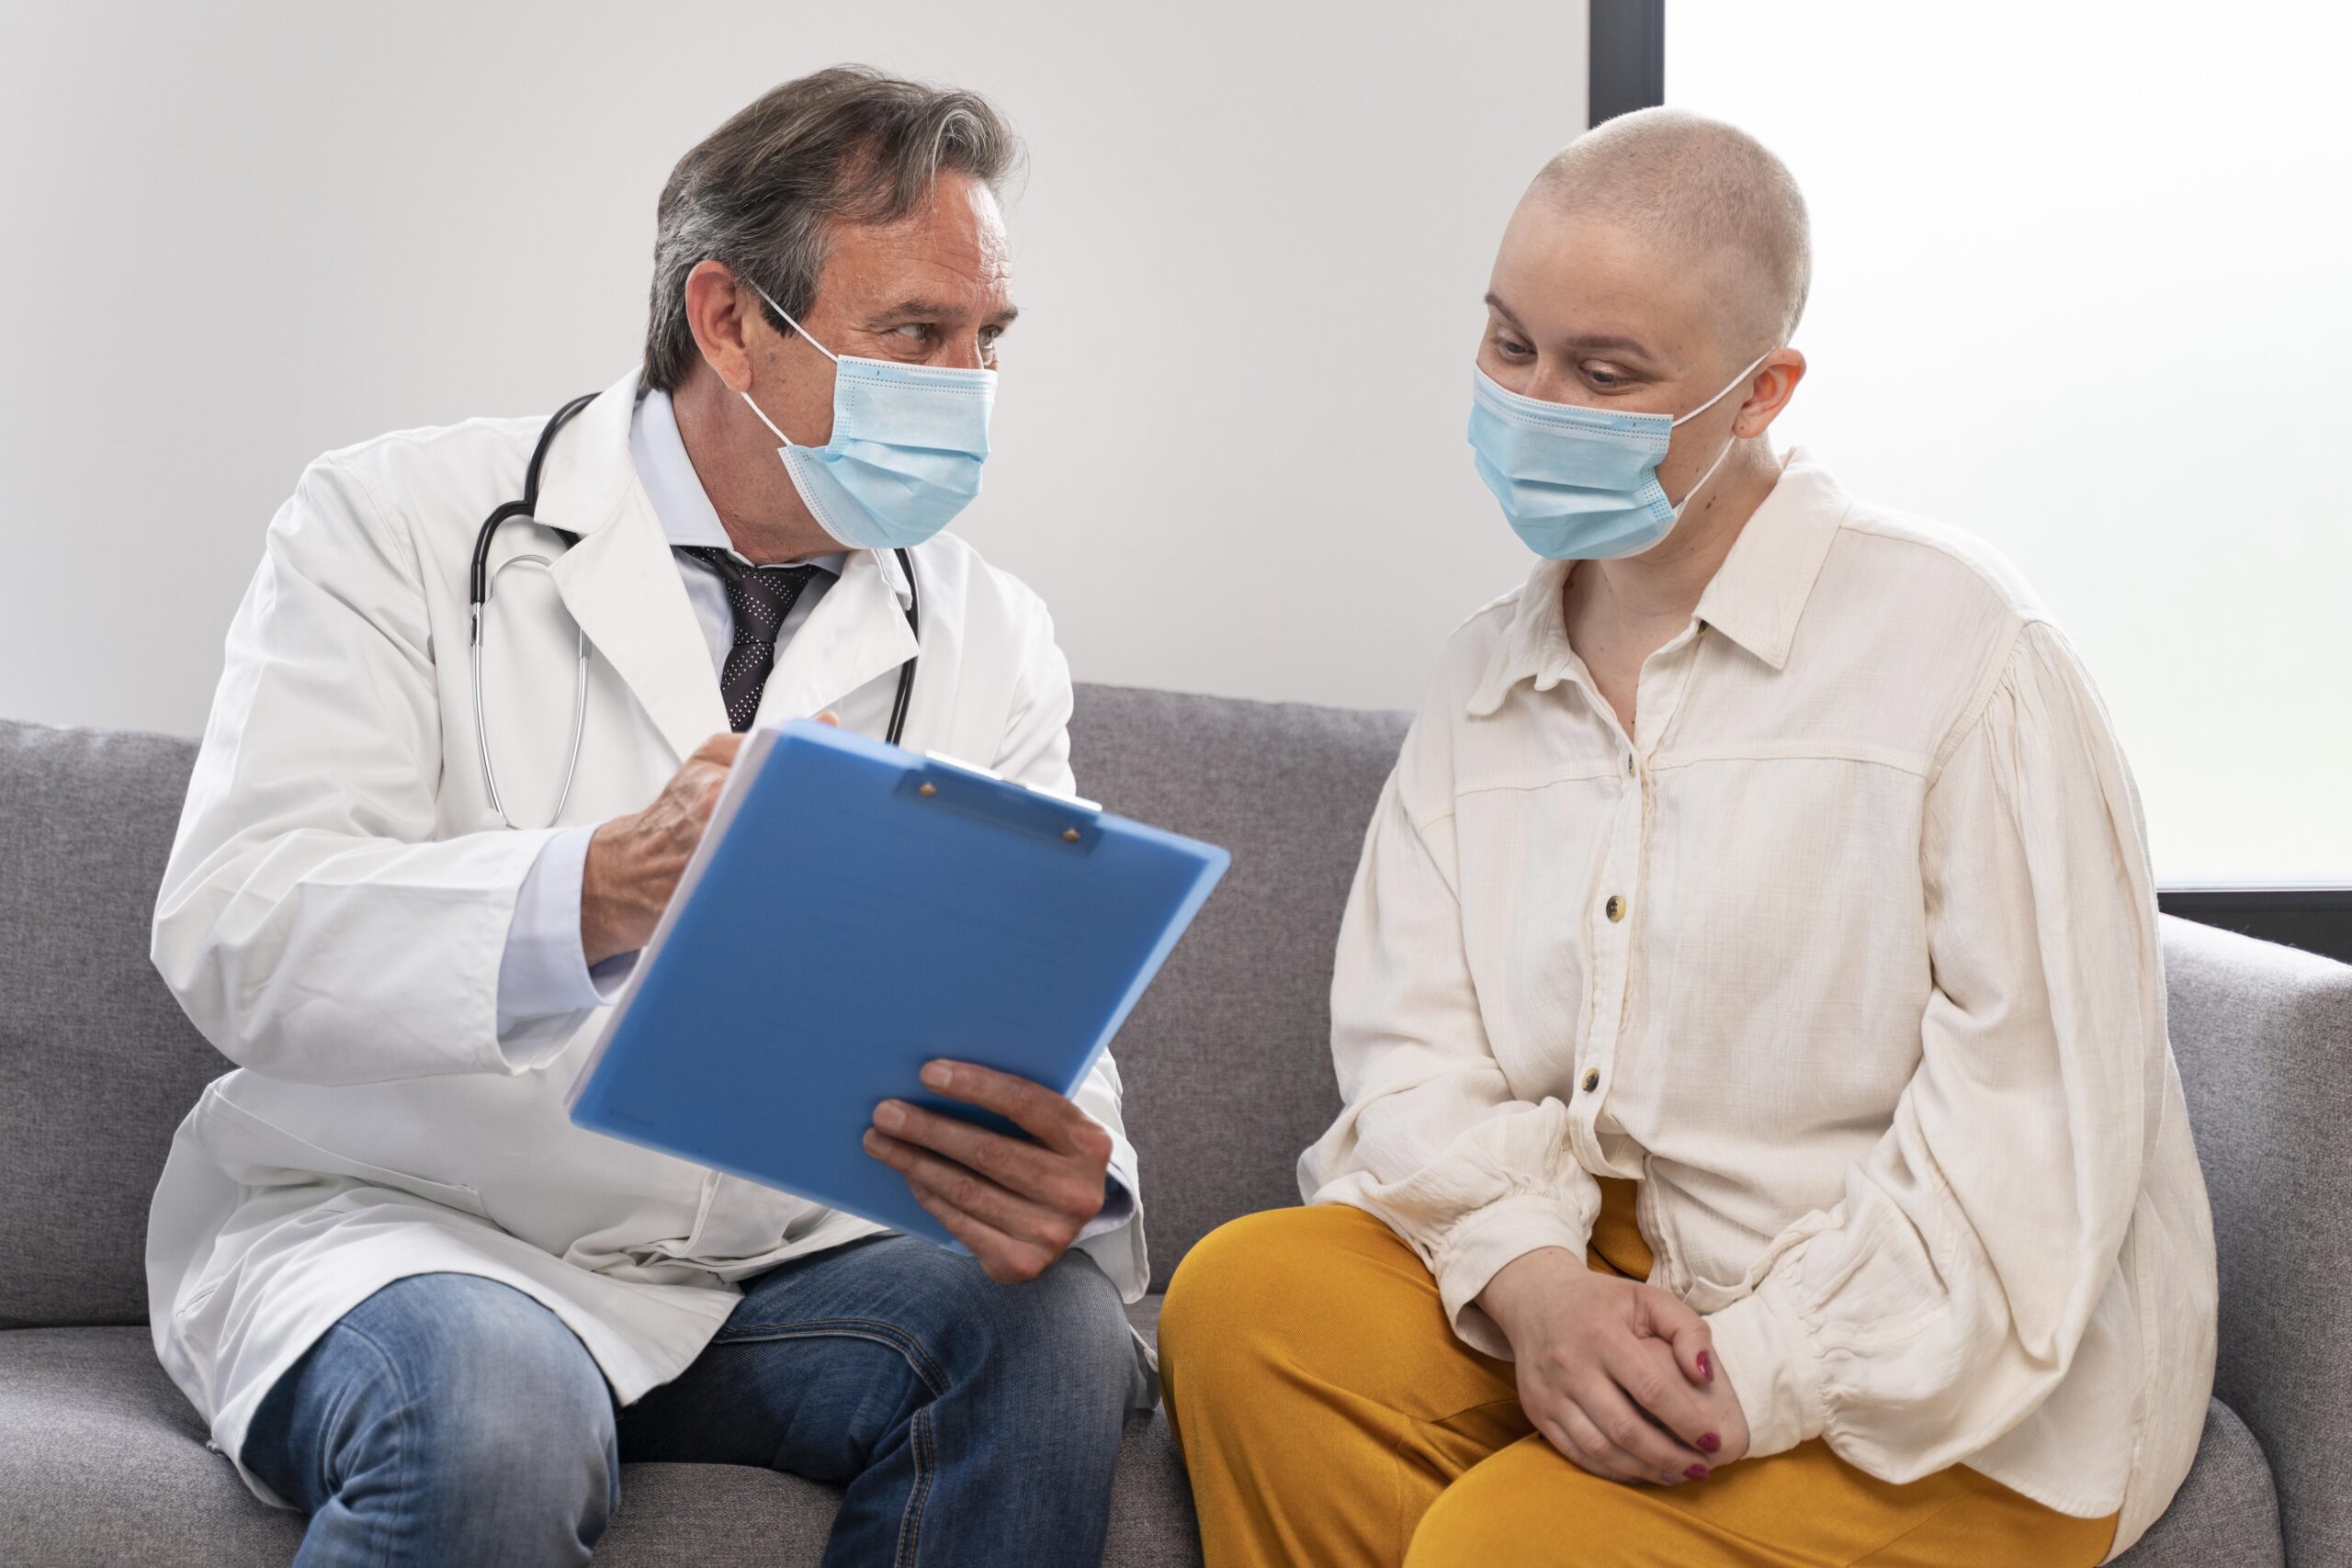 Do I Have Esophageal Cancer Quiz? This quiz is designed to assess your risk of developing esophageal cancer, a serious condition that affects the esophagus - the tube that carries food from the mouth to the stomach.